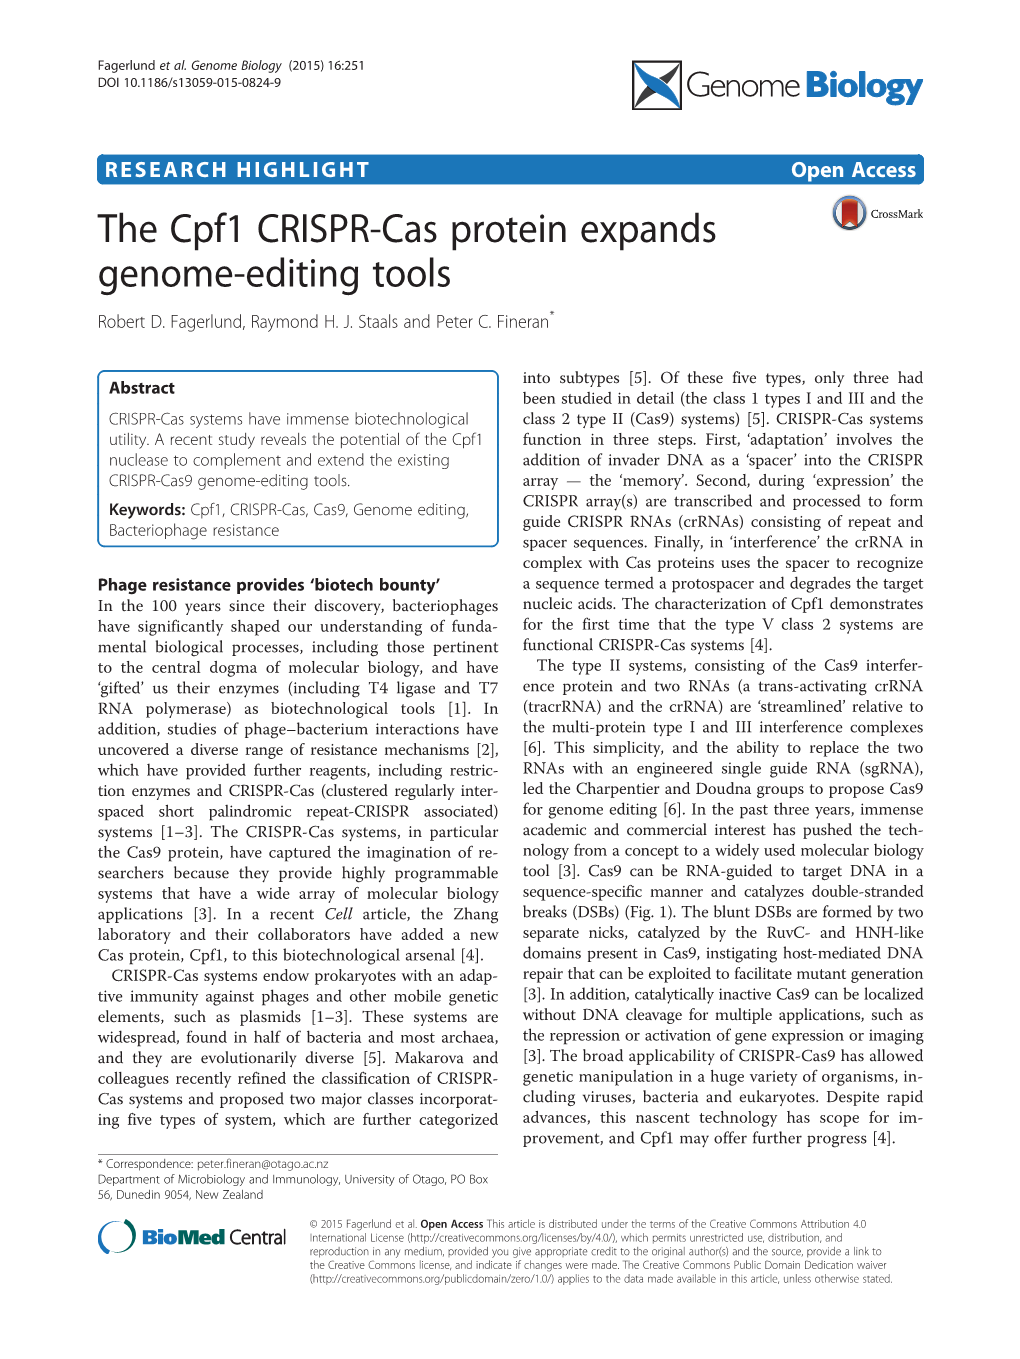 The Cpf1 CRISPR-Cas Protein Expands Genome-Editing Tools Robert D